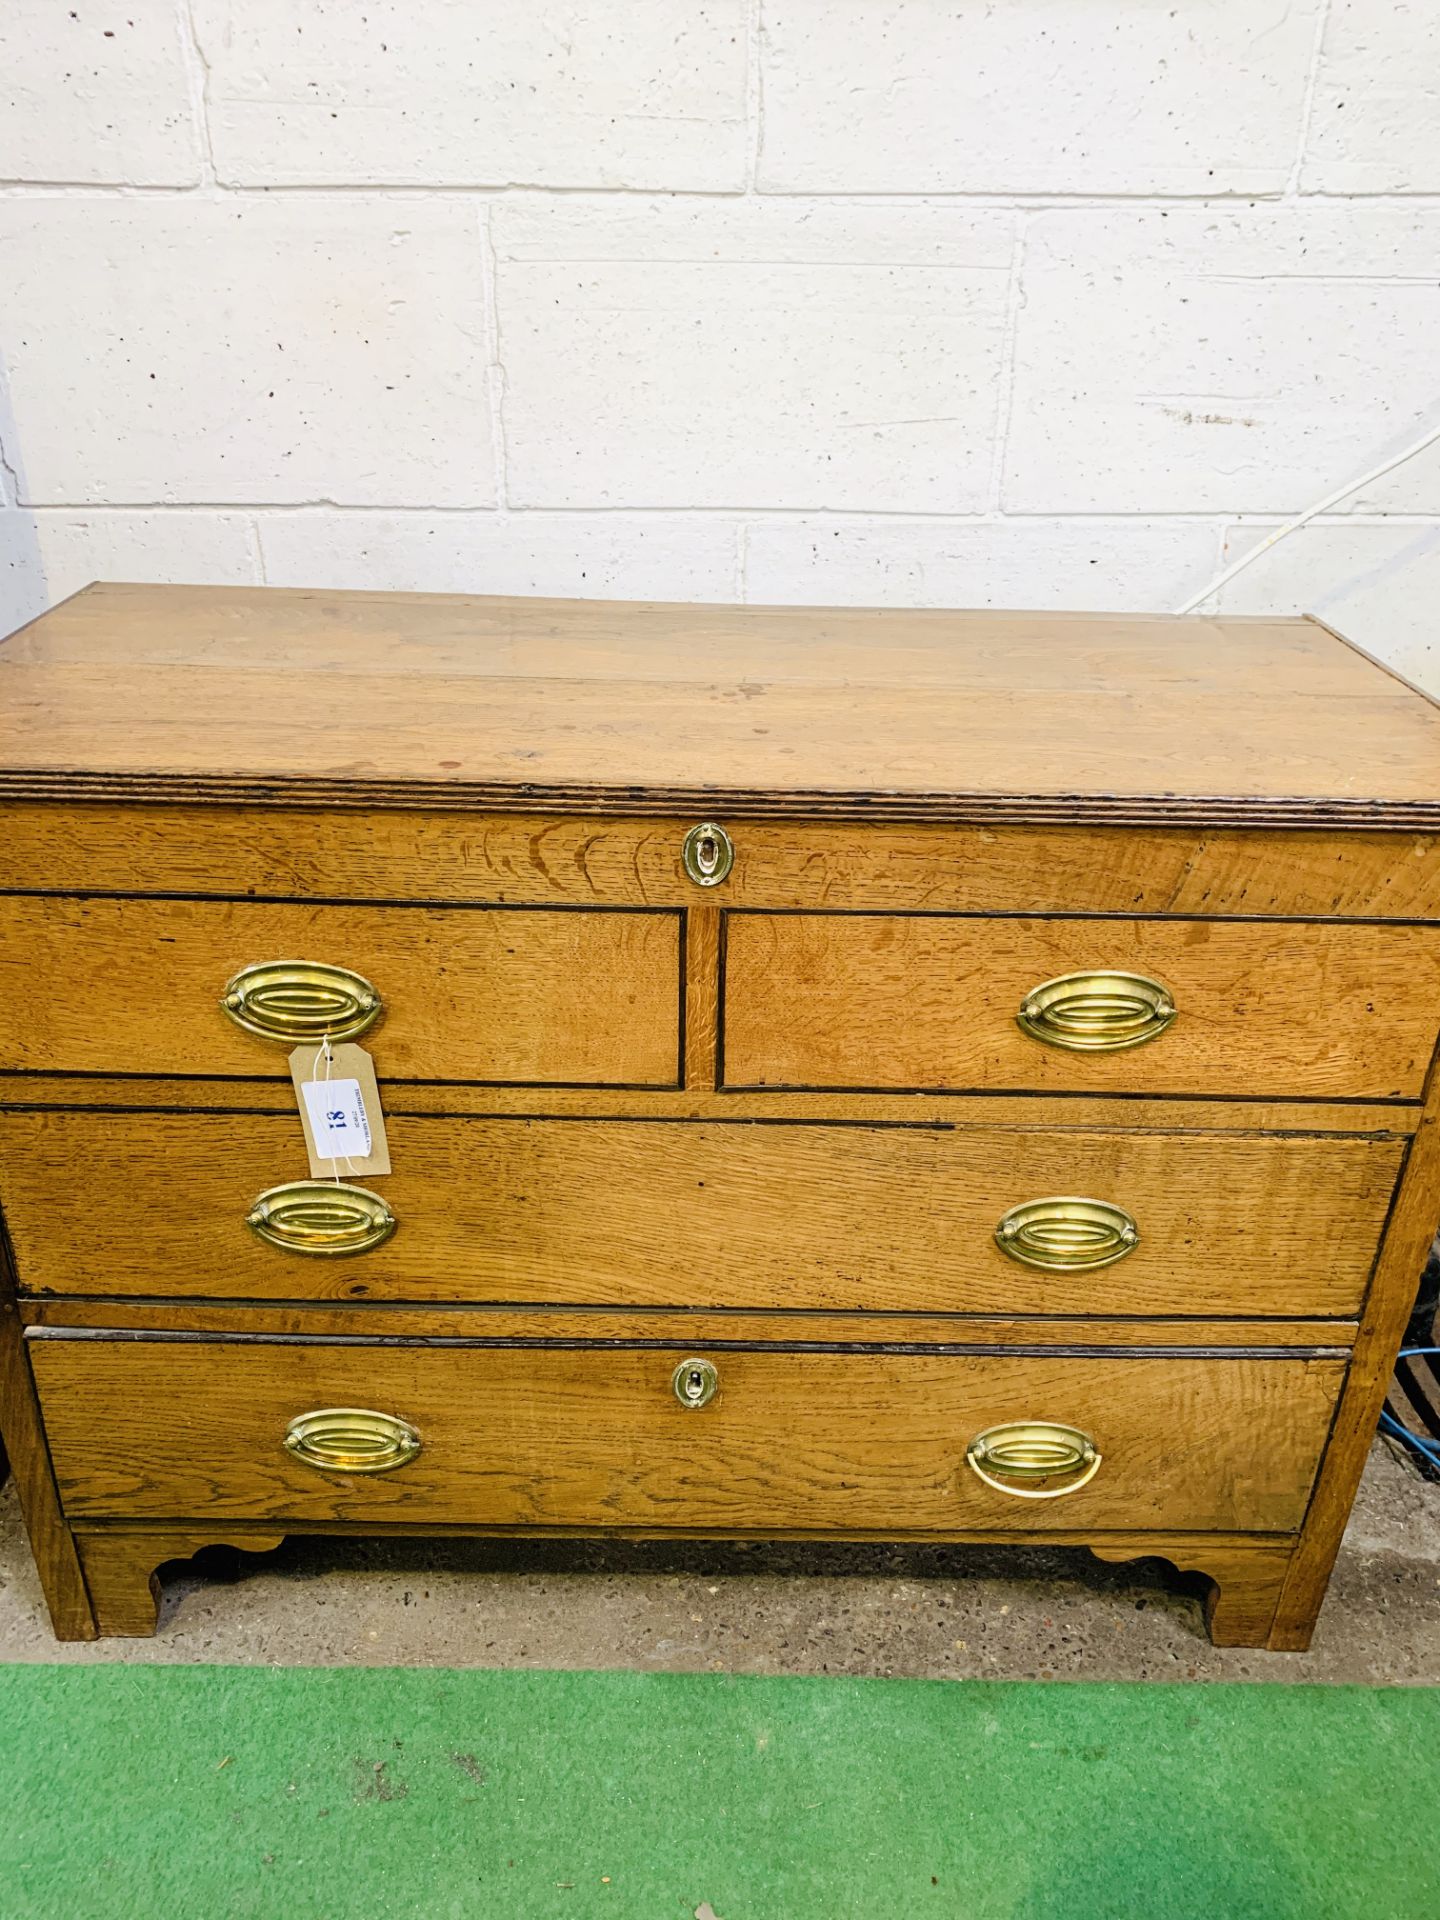 Oak former chest of 2 over 2 drawers converted to a cabinet with lifting lid